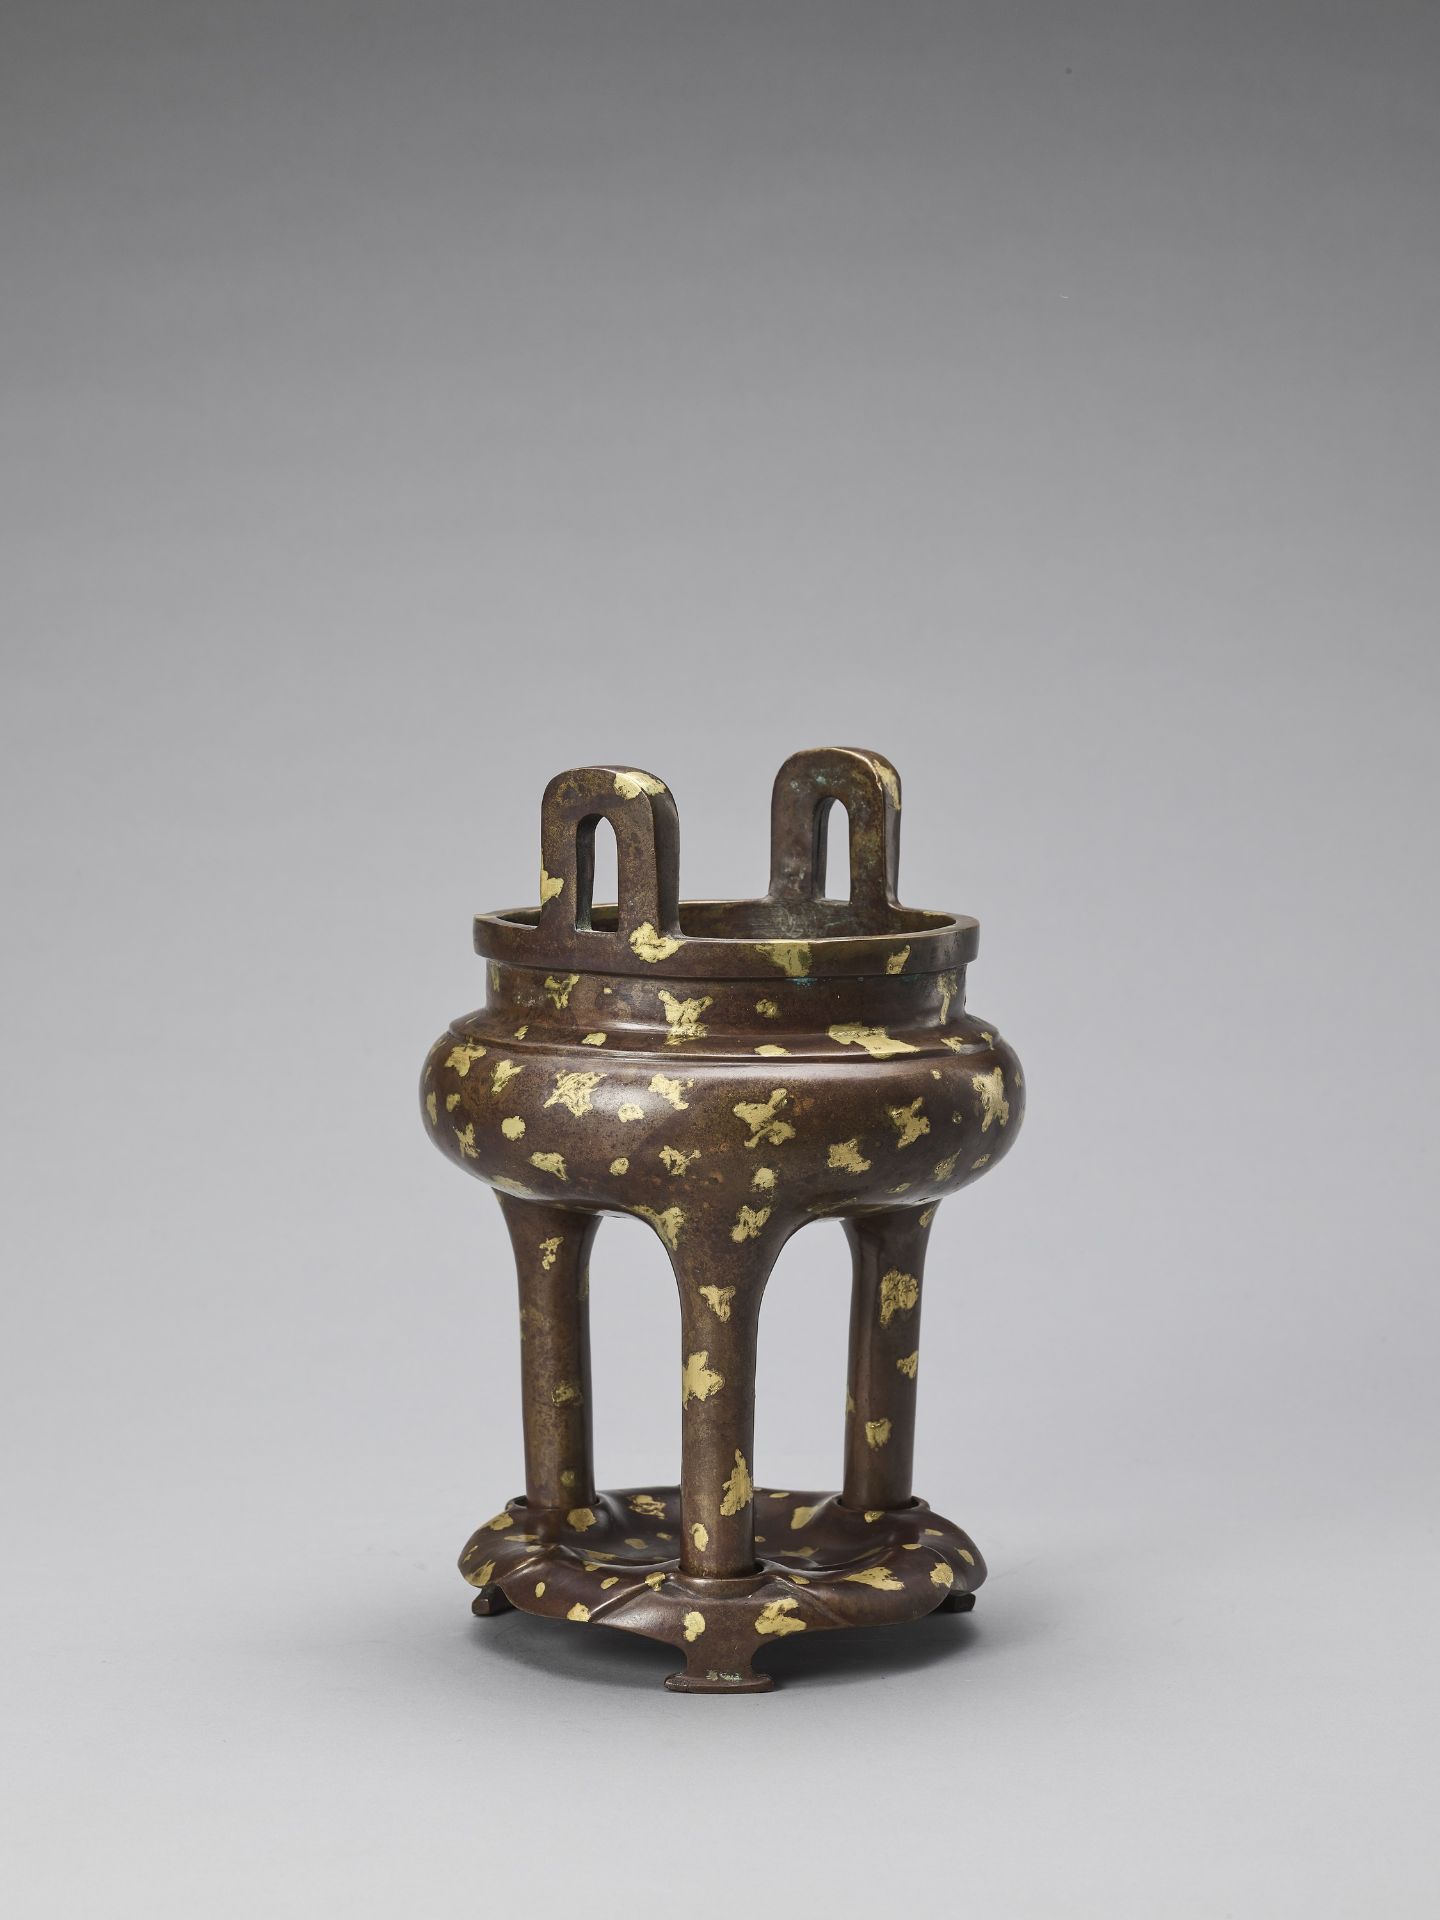 A GOLD-SPLASHED BRONZE TRIPOD CENSER WITH SIX-CHARACTER XUANDE MARK, QING - Image 4 of 8